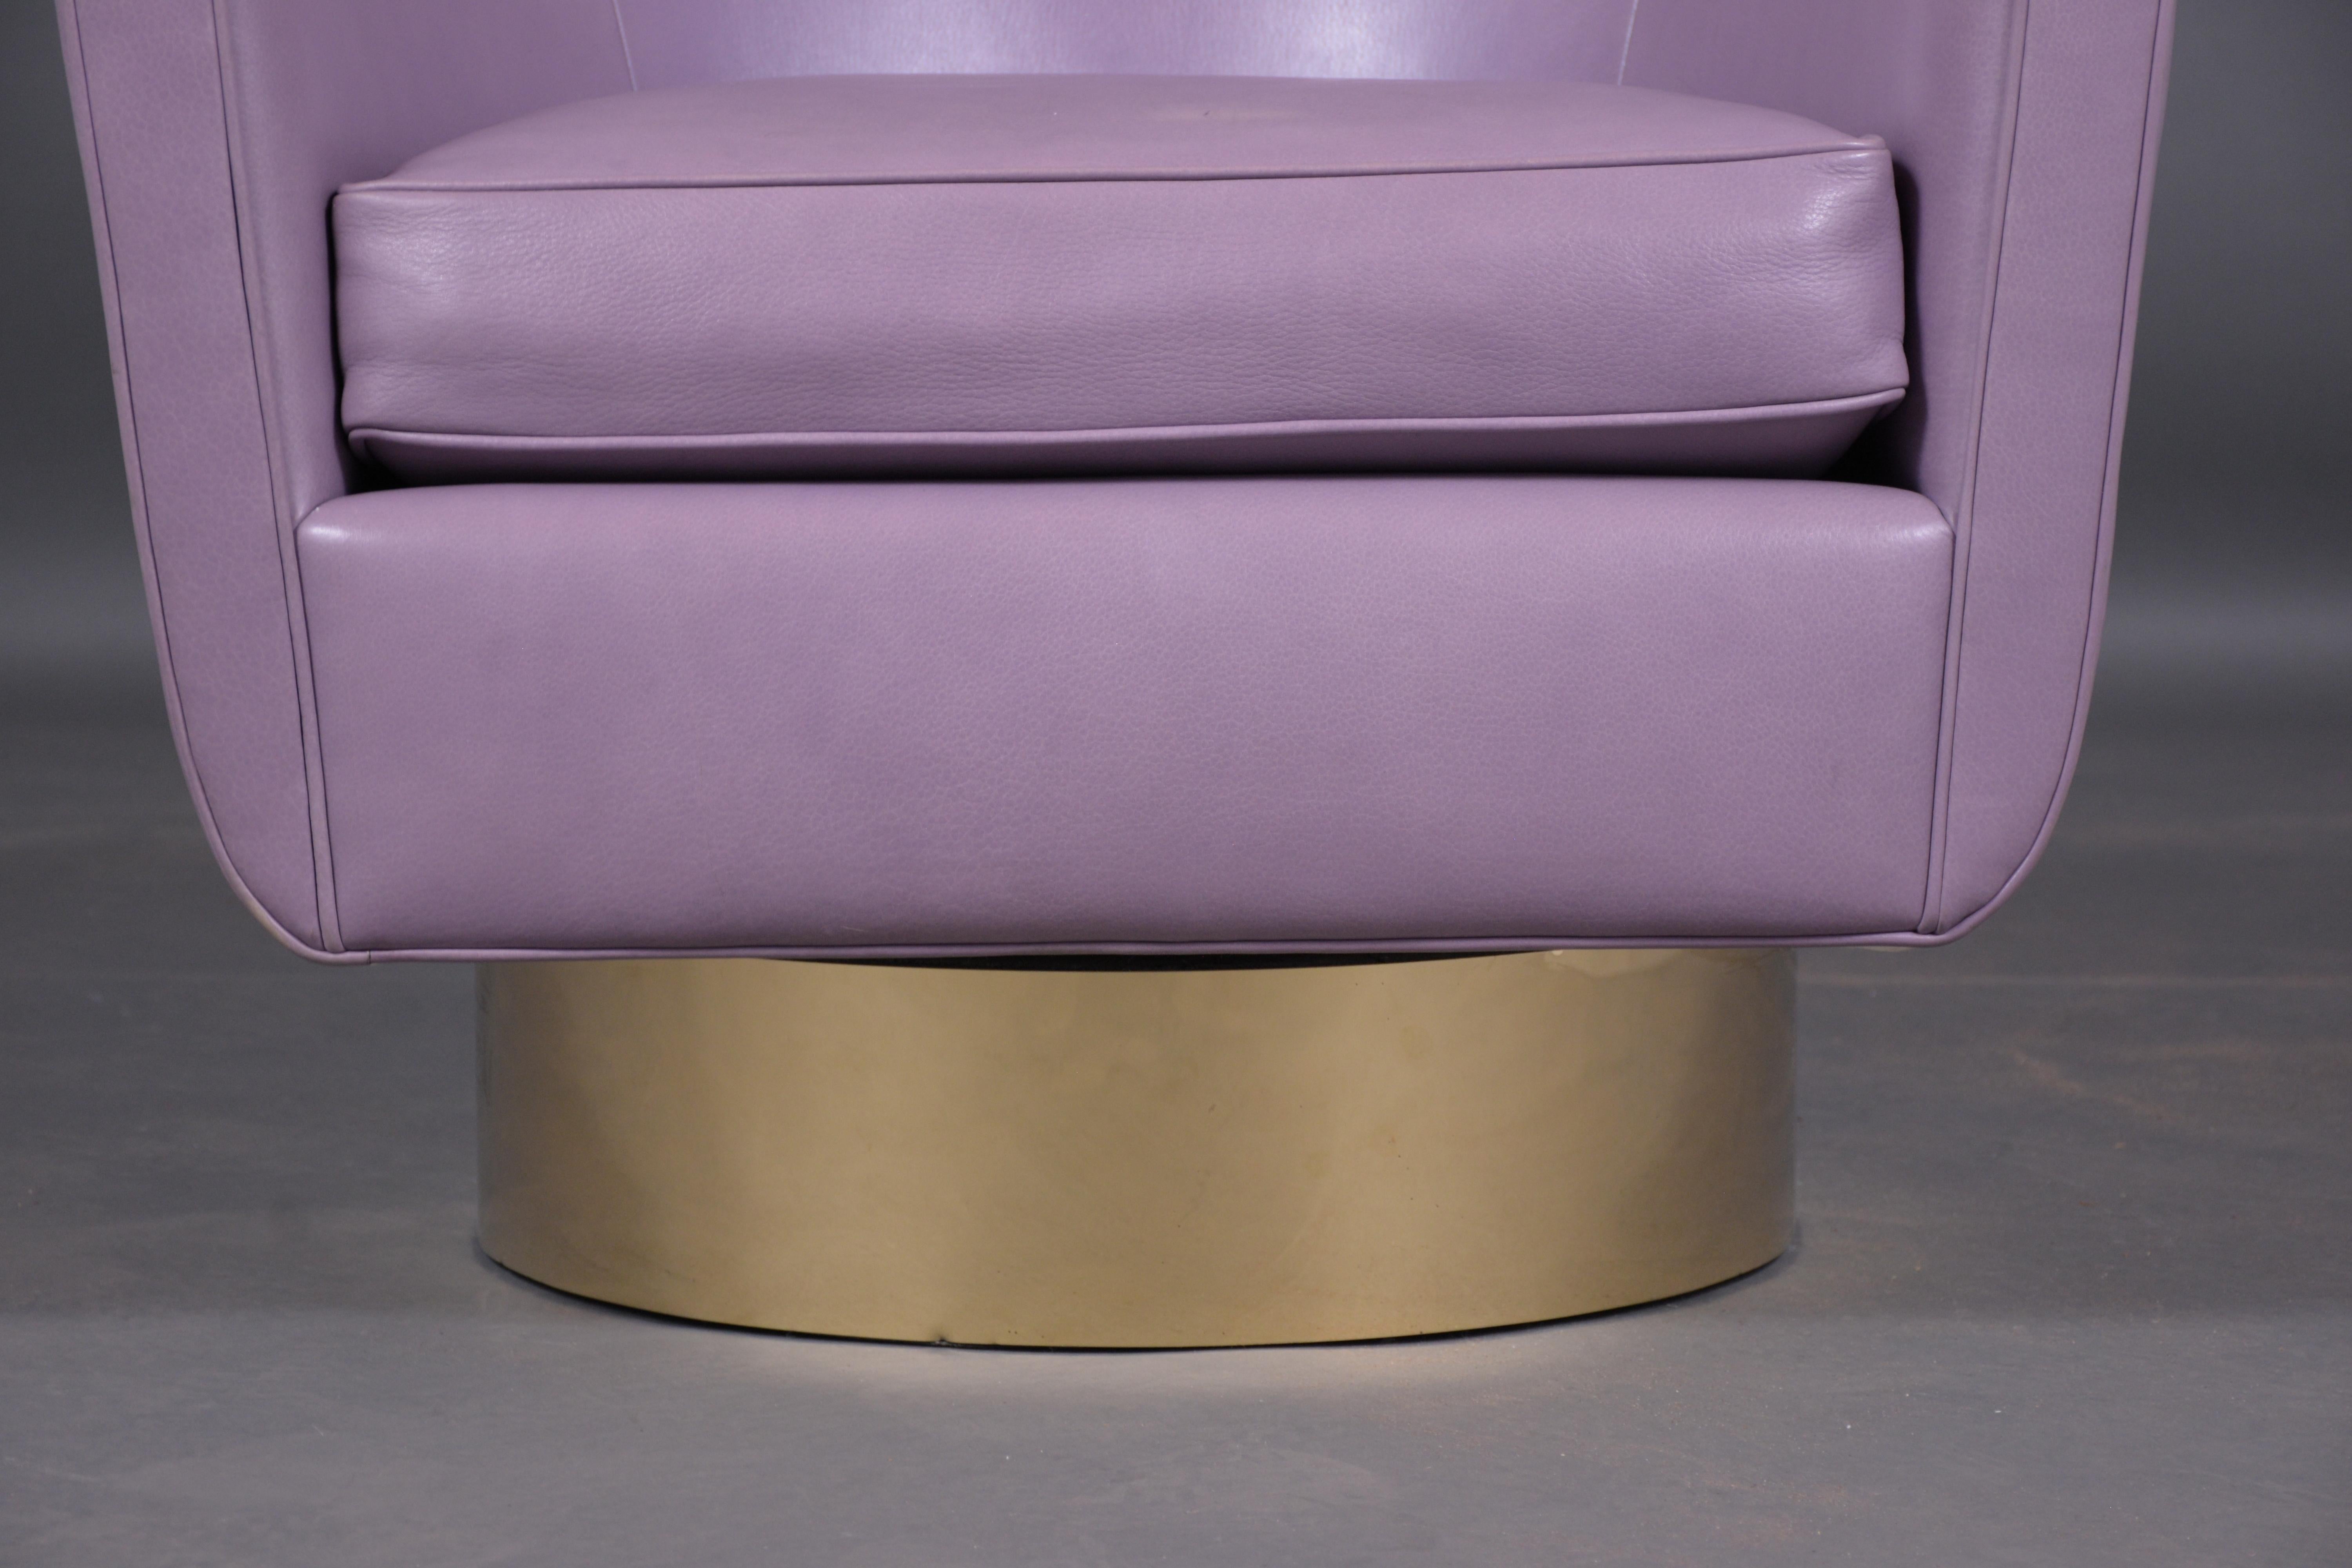 Wood Restored Mid-Century Brass Swivel Chair in Violet Leather - Modern Elegance For Sale